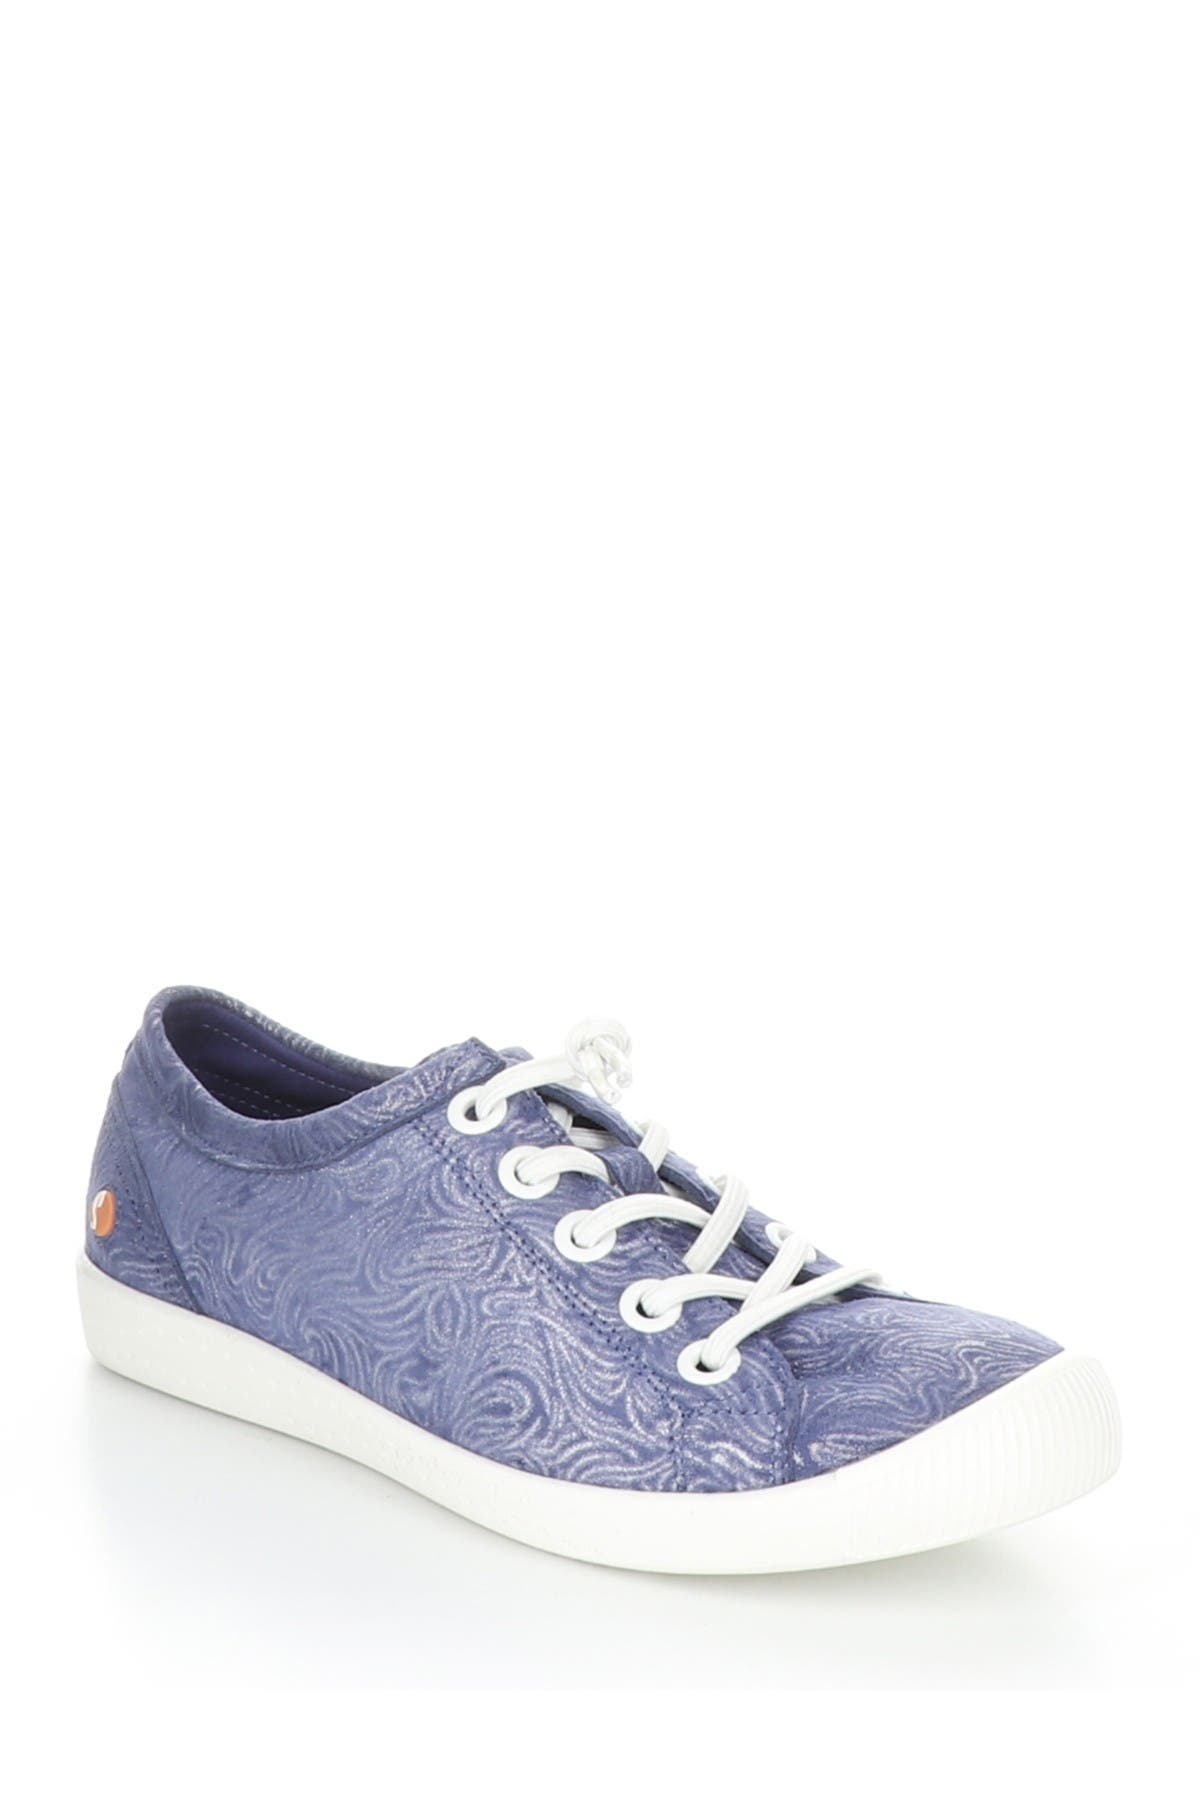 Softinos By Fly London Isla Distressed Sneaker In 014 Blue Suede Curve